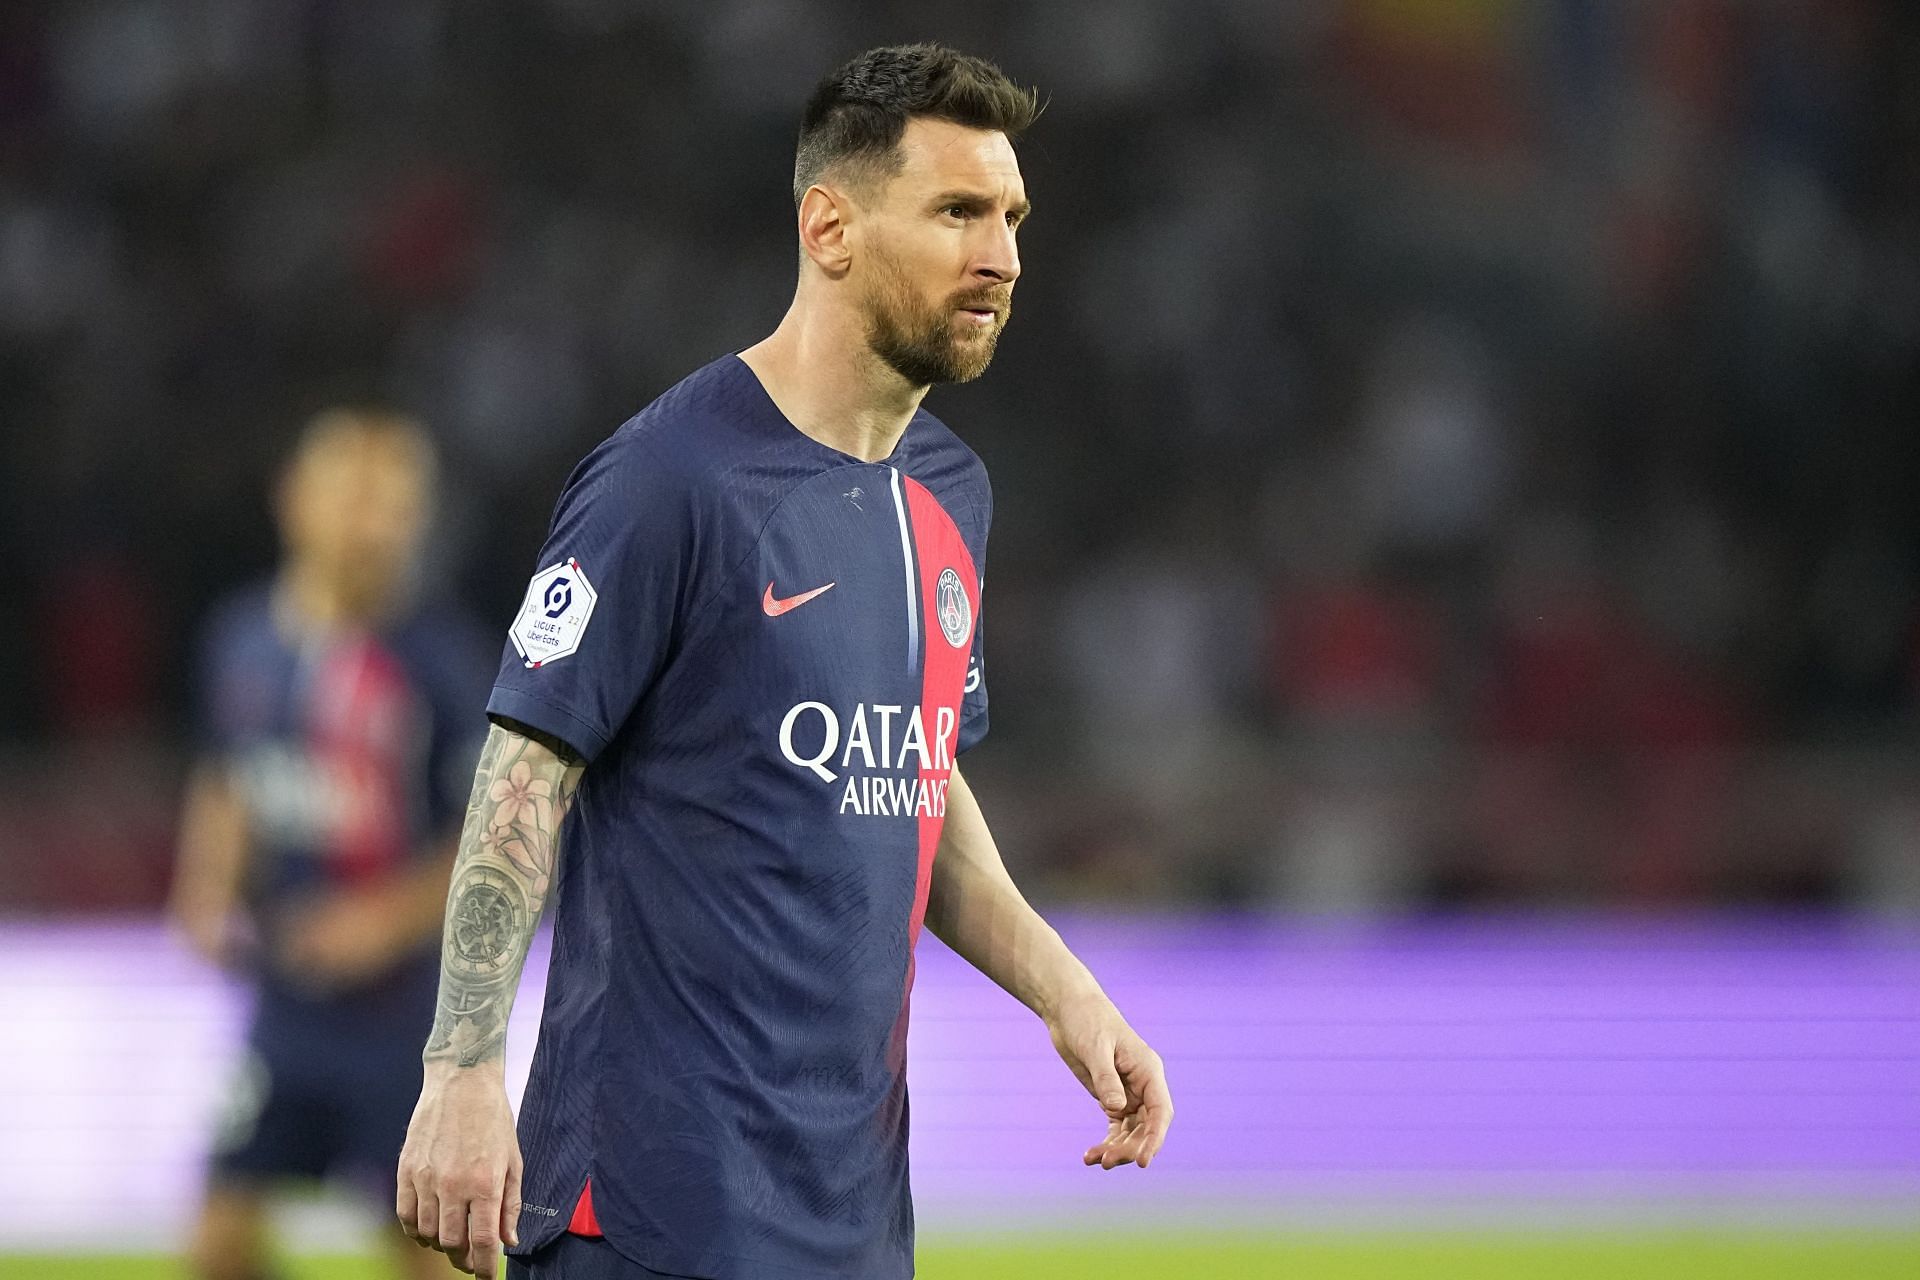 Messi to Miami: an MLS masterstroke or Beckham's biggest gamble